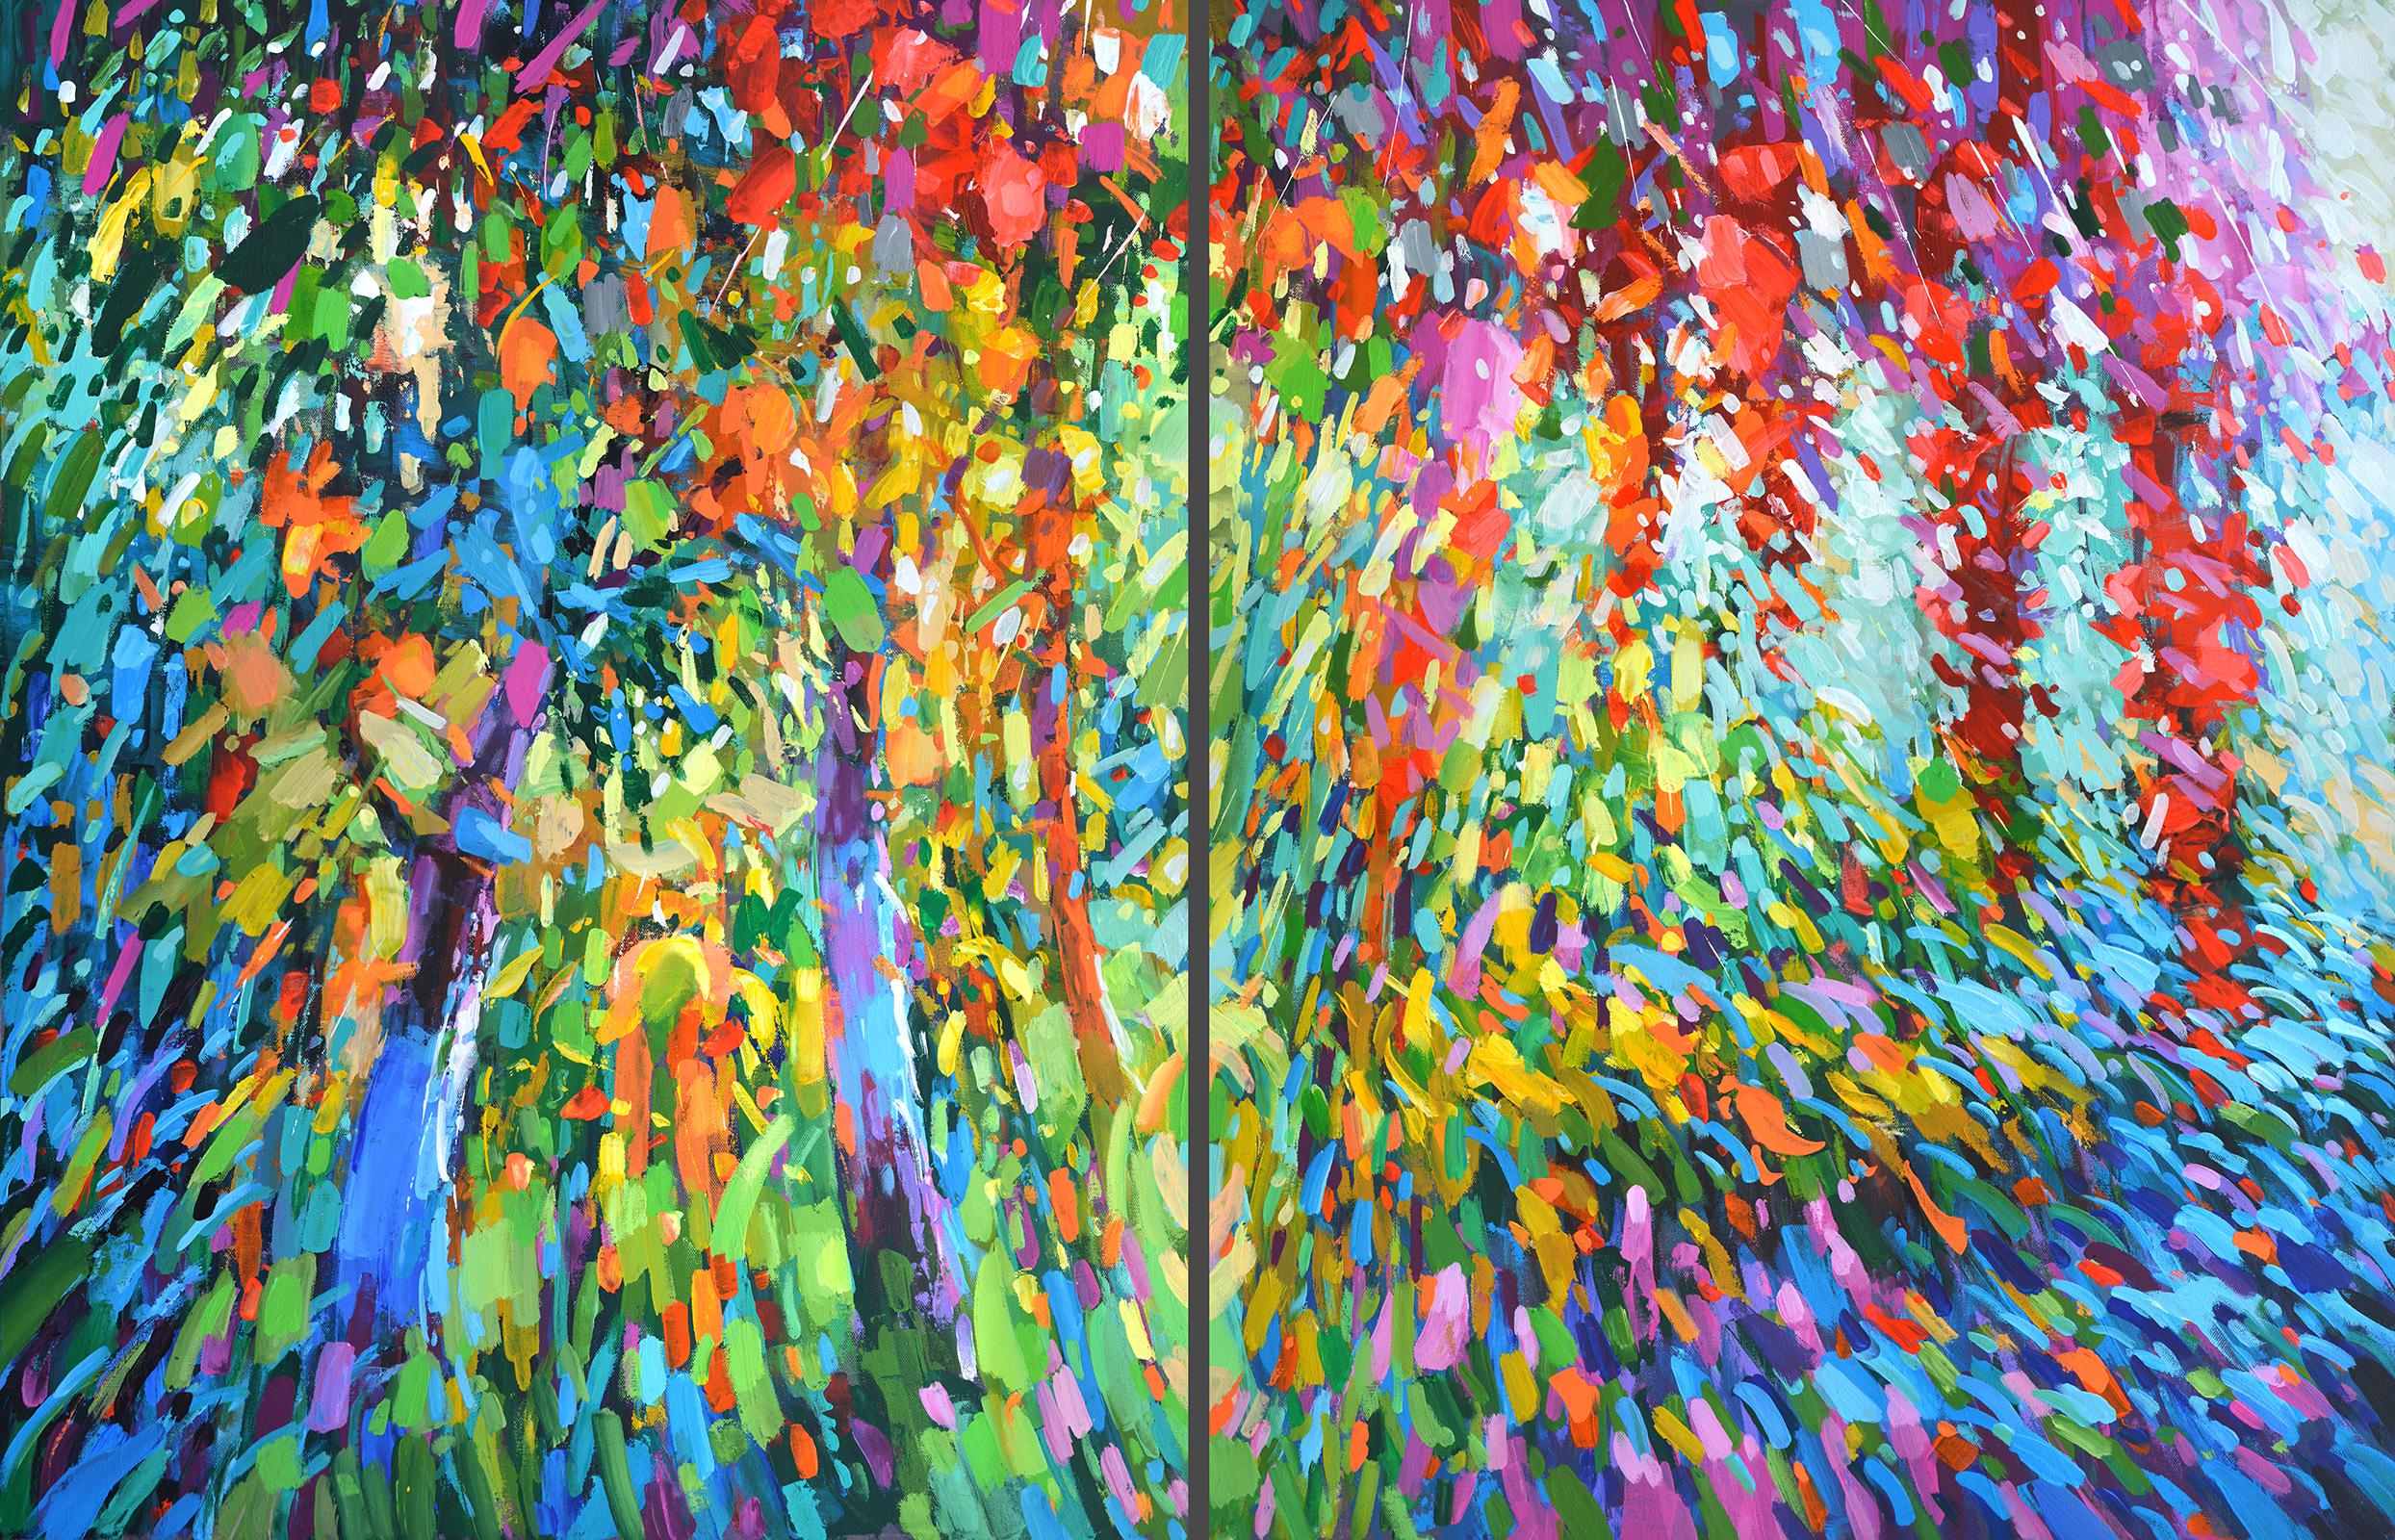 In the light of the leaves “Autumn Diptych” 2 paintings